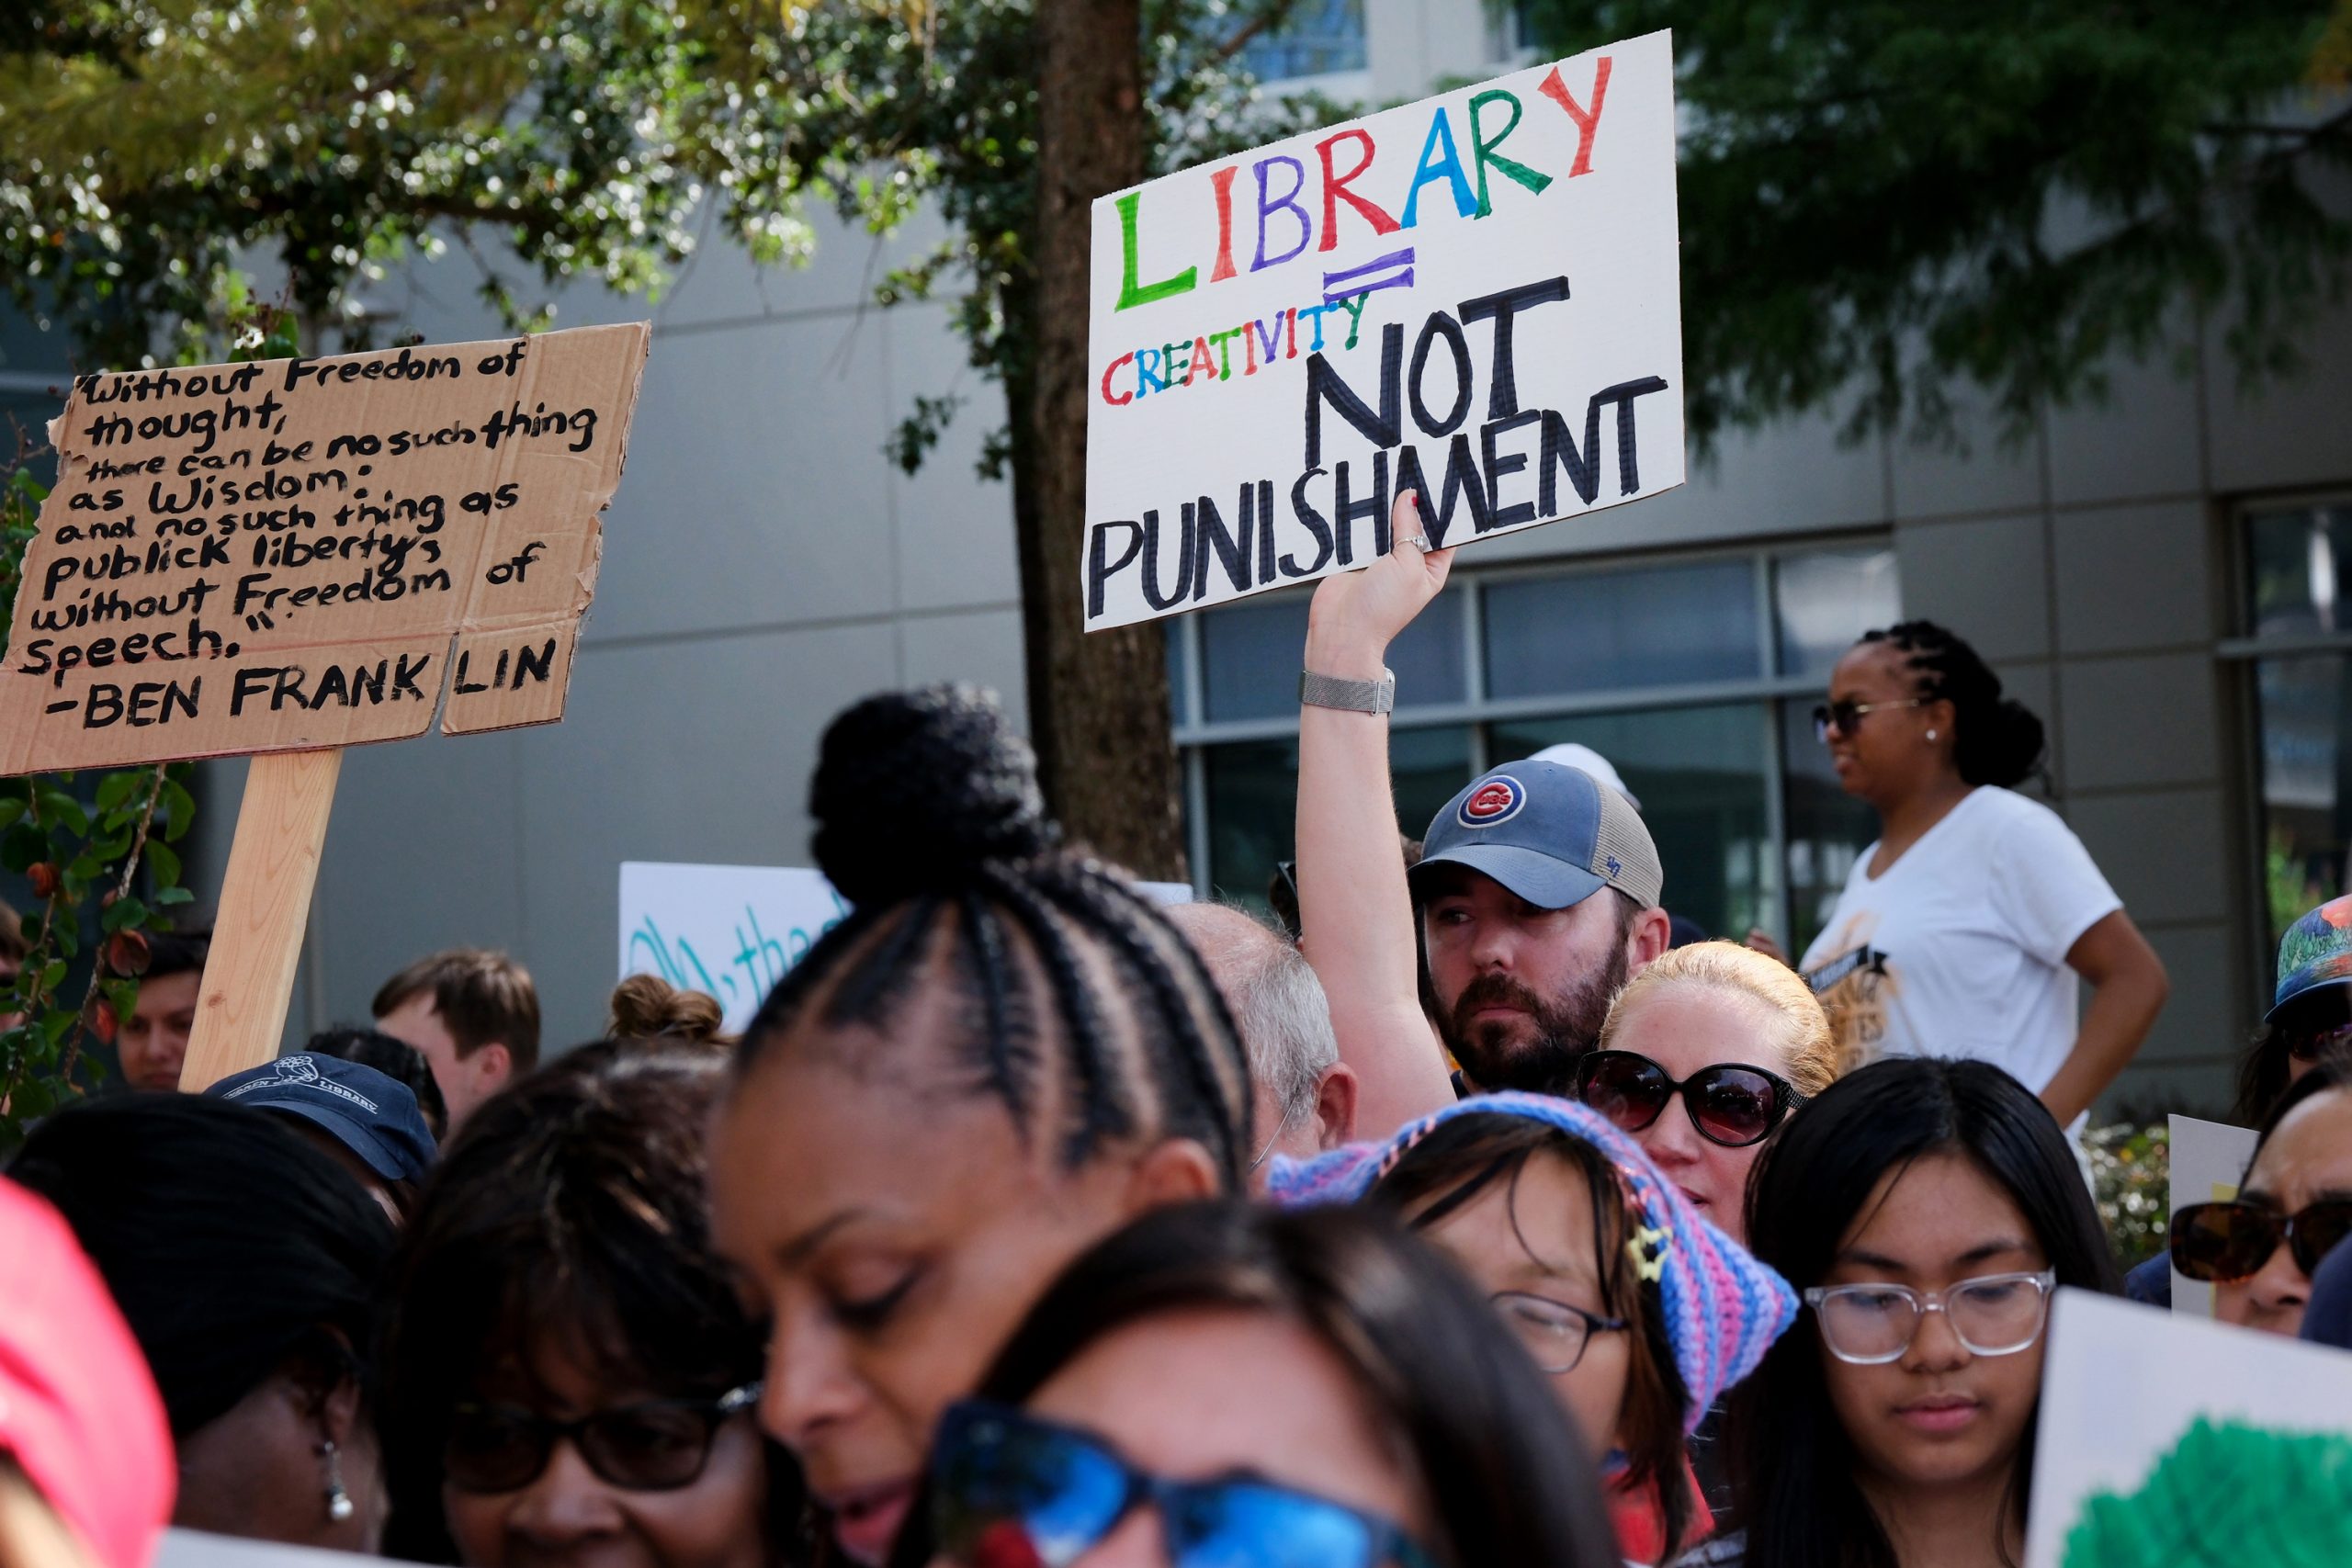 Demonstrators protest the decision by HISD Superintendent Mike Miles to turn some school libraries into discipline rooms.